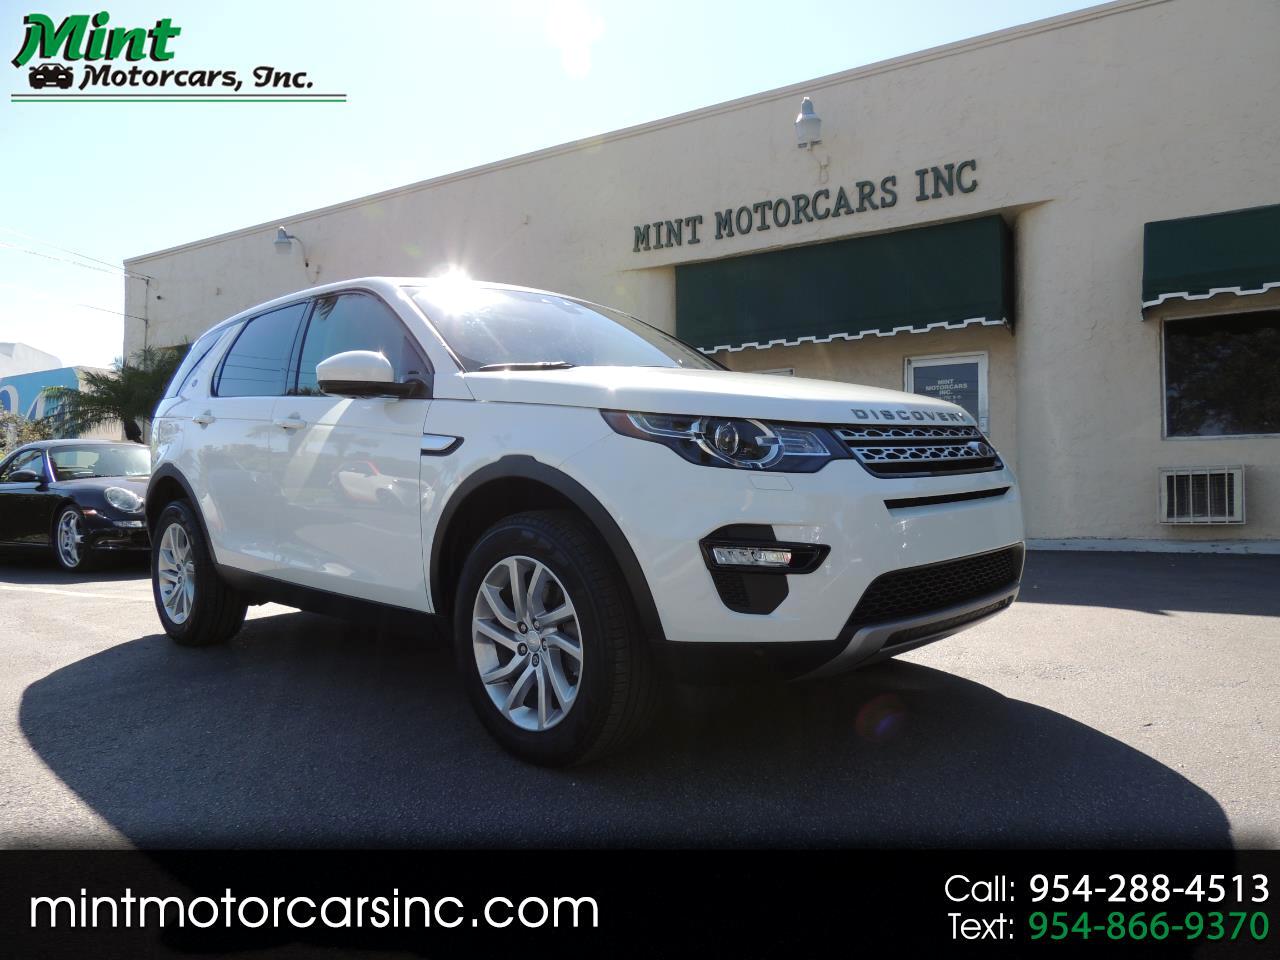 Used 2018 Land Rover Discovery Sport Hse 237 Hp For Sale In Ft